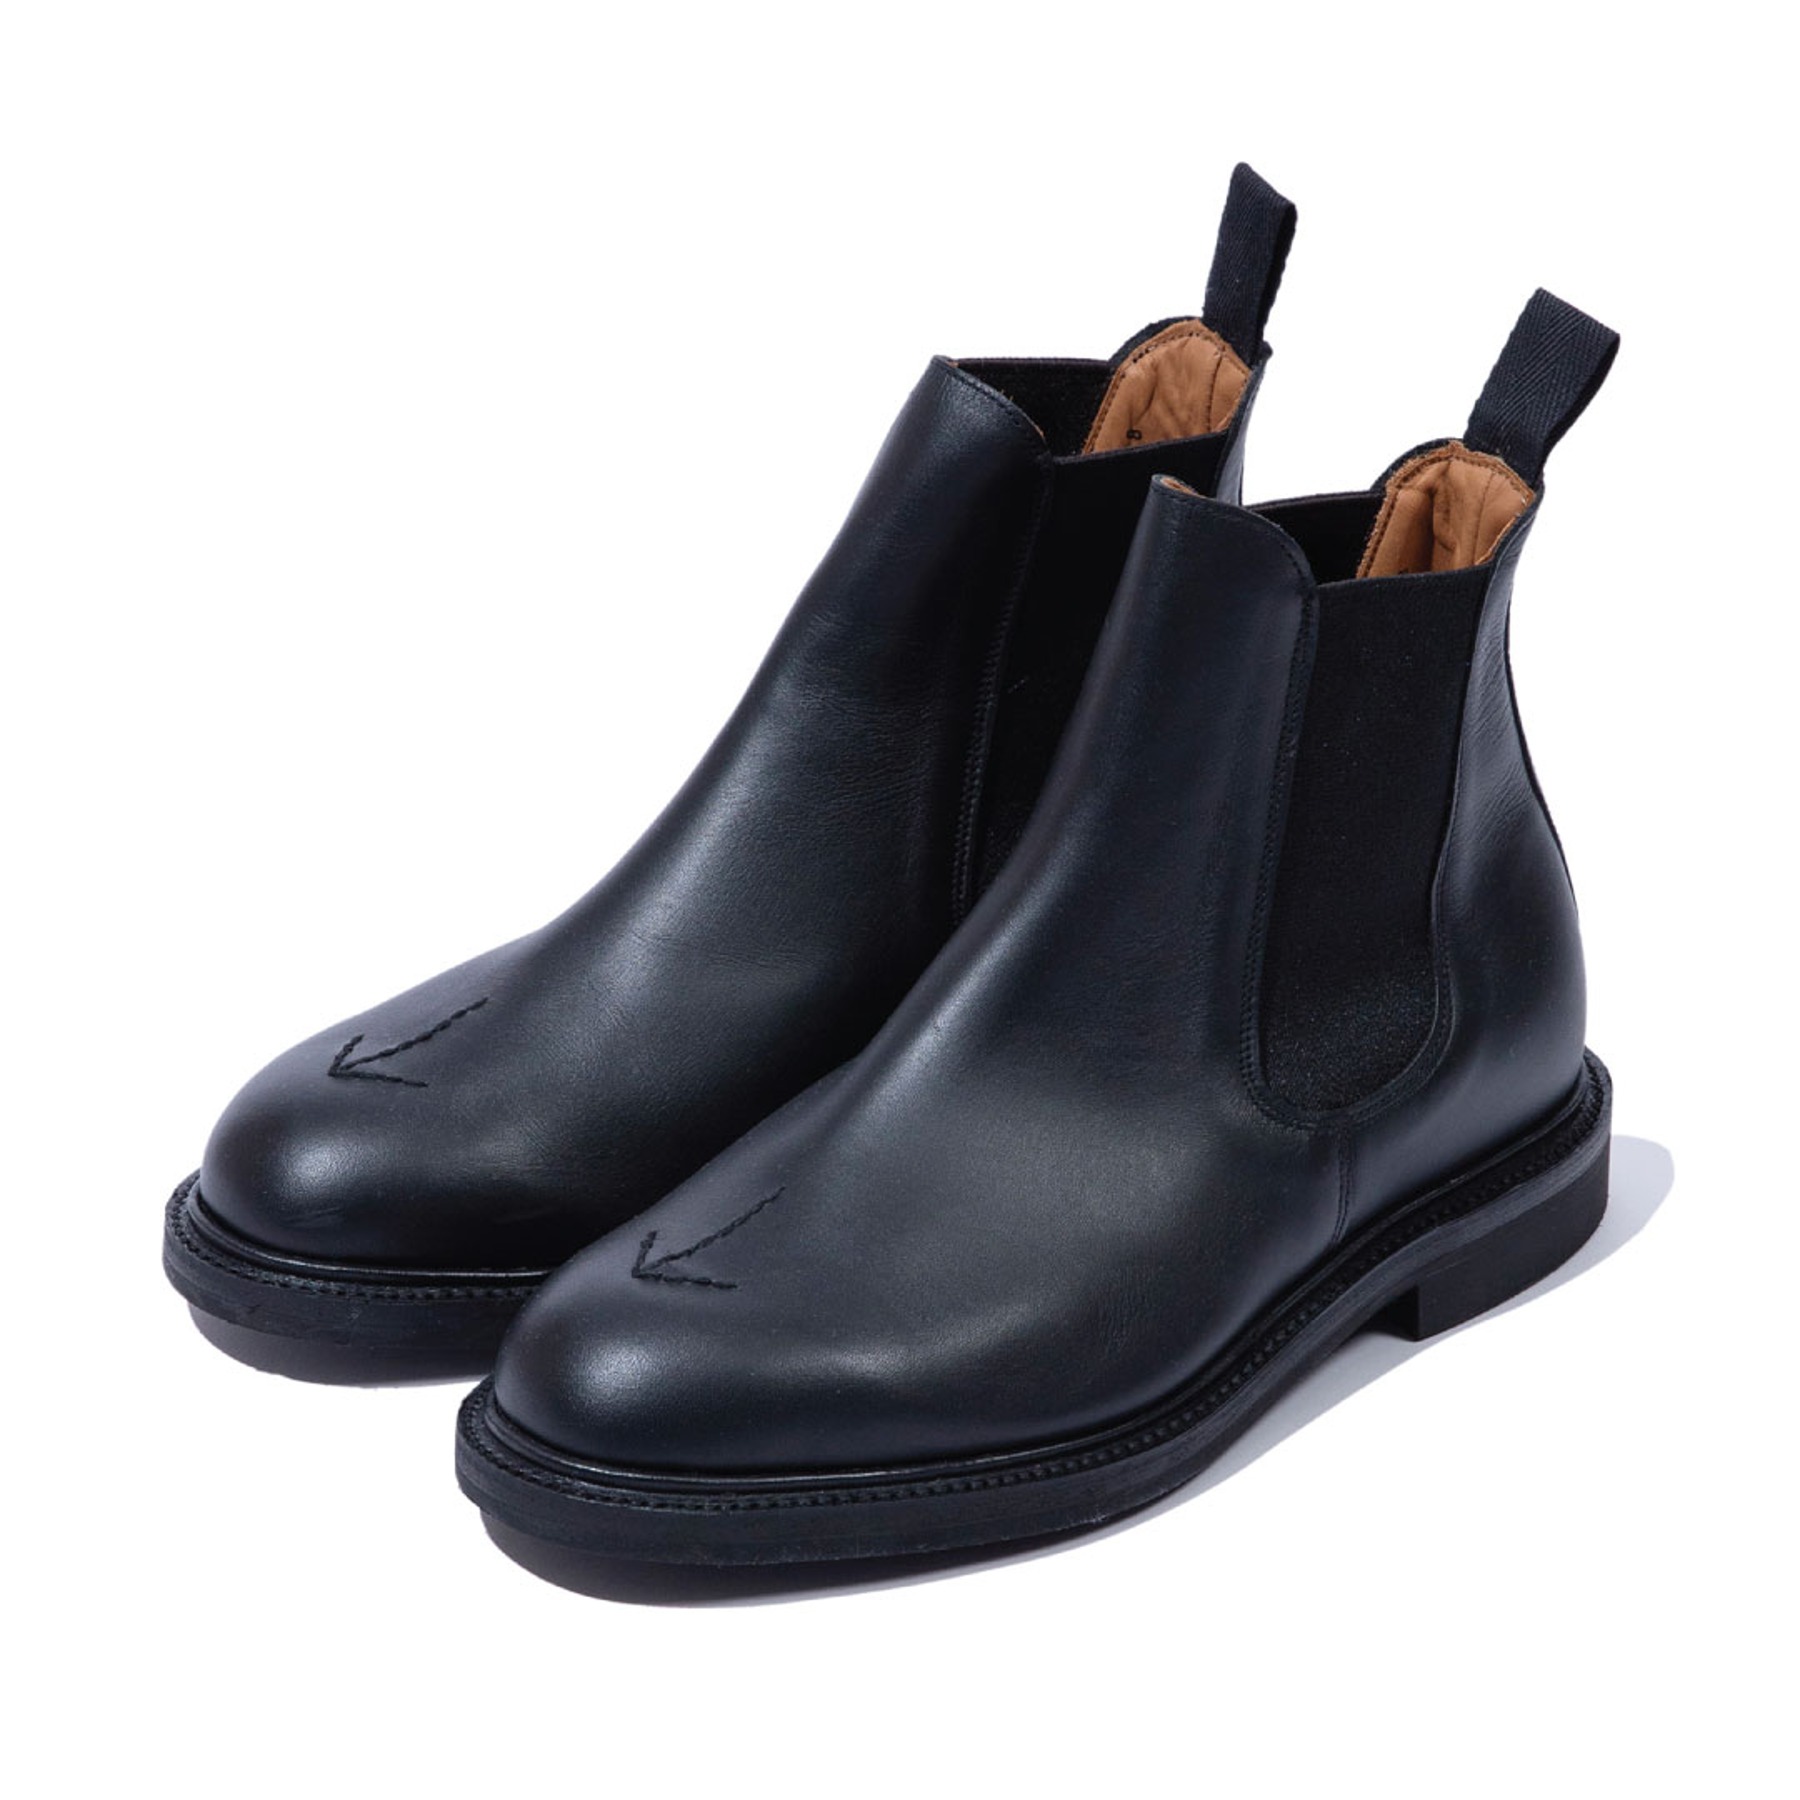 CHELSEA BOOTS - BLACK WAXY LEATHER with BLACK ARROW